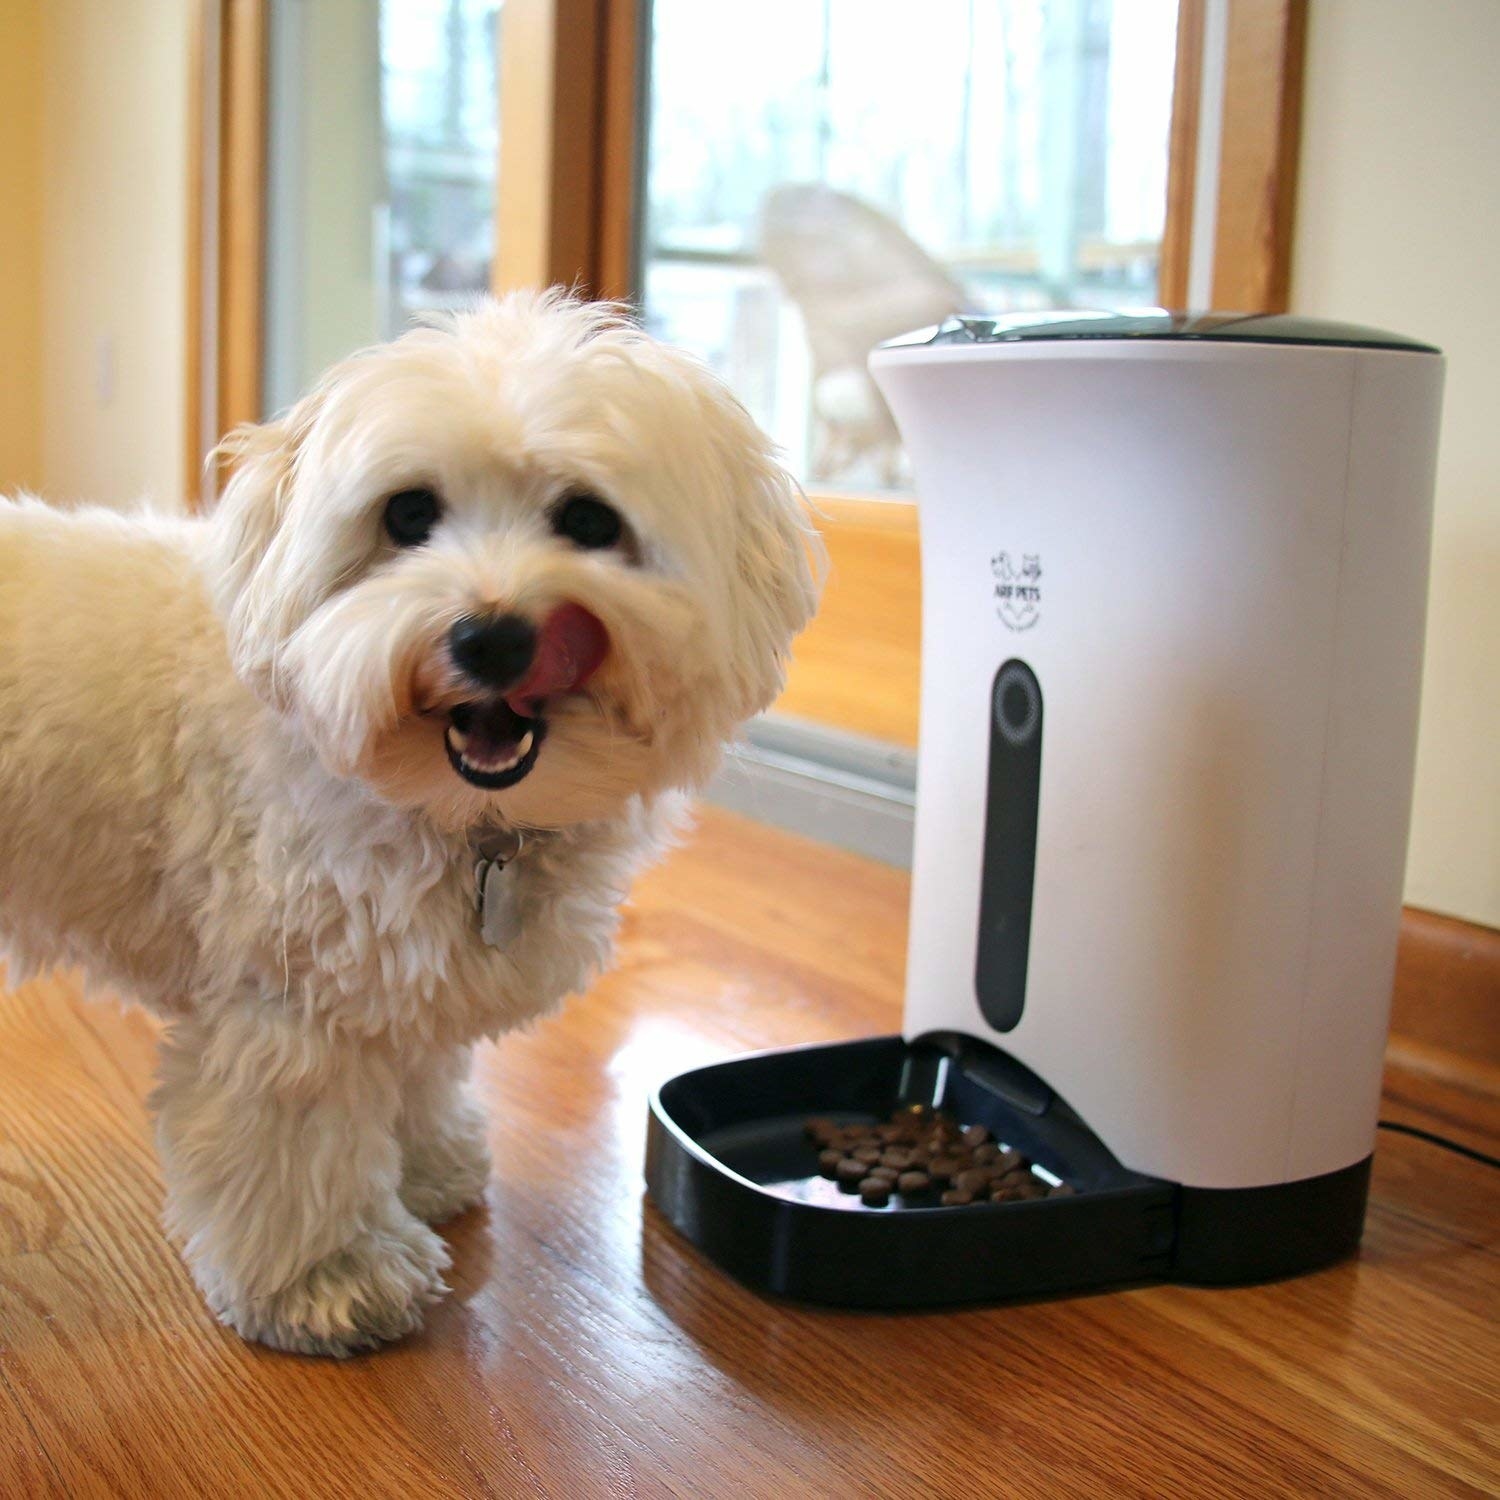 dog licking lips beside of the pet feeder